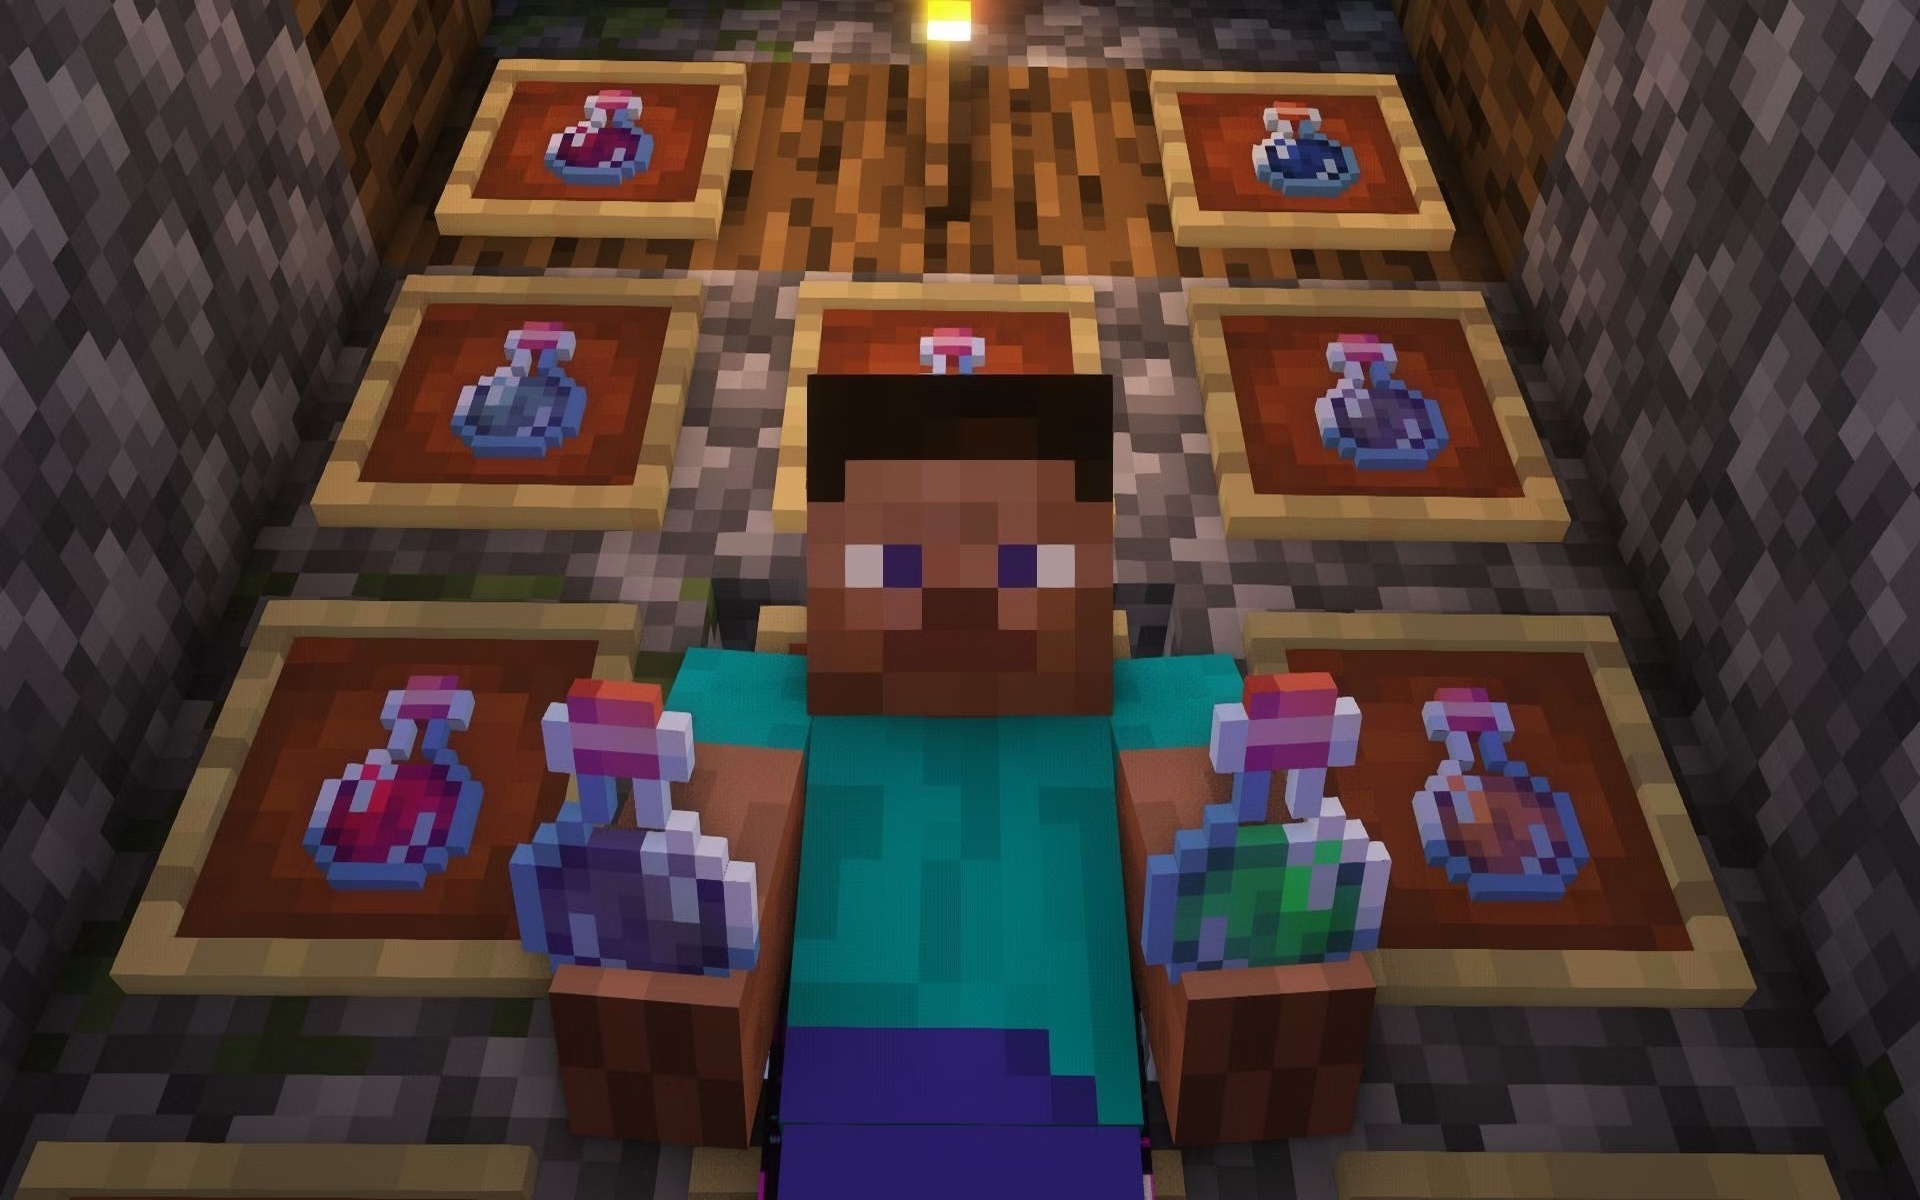 How To Make A Potion Of Haste In Minecraft